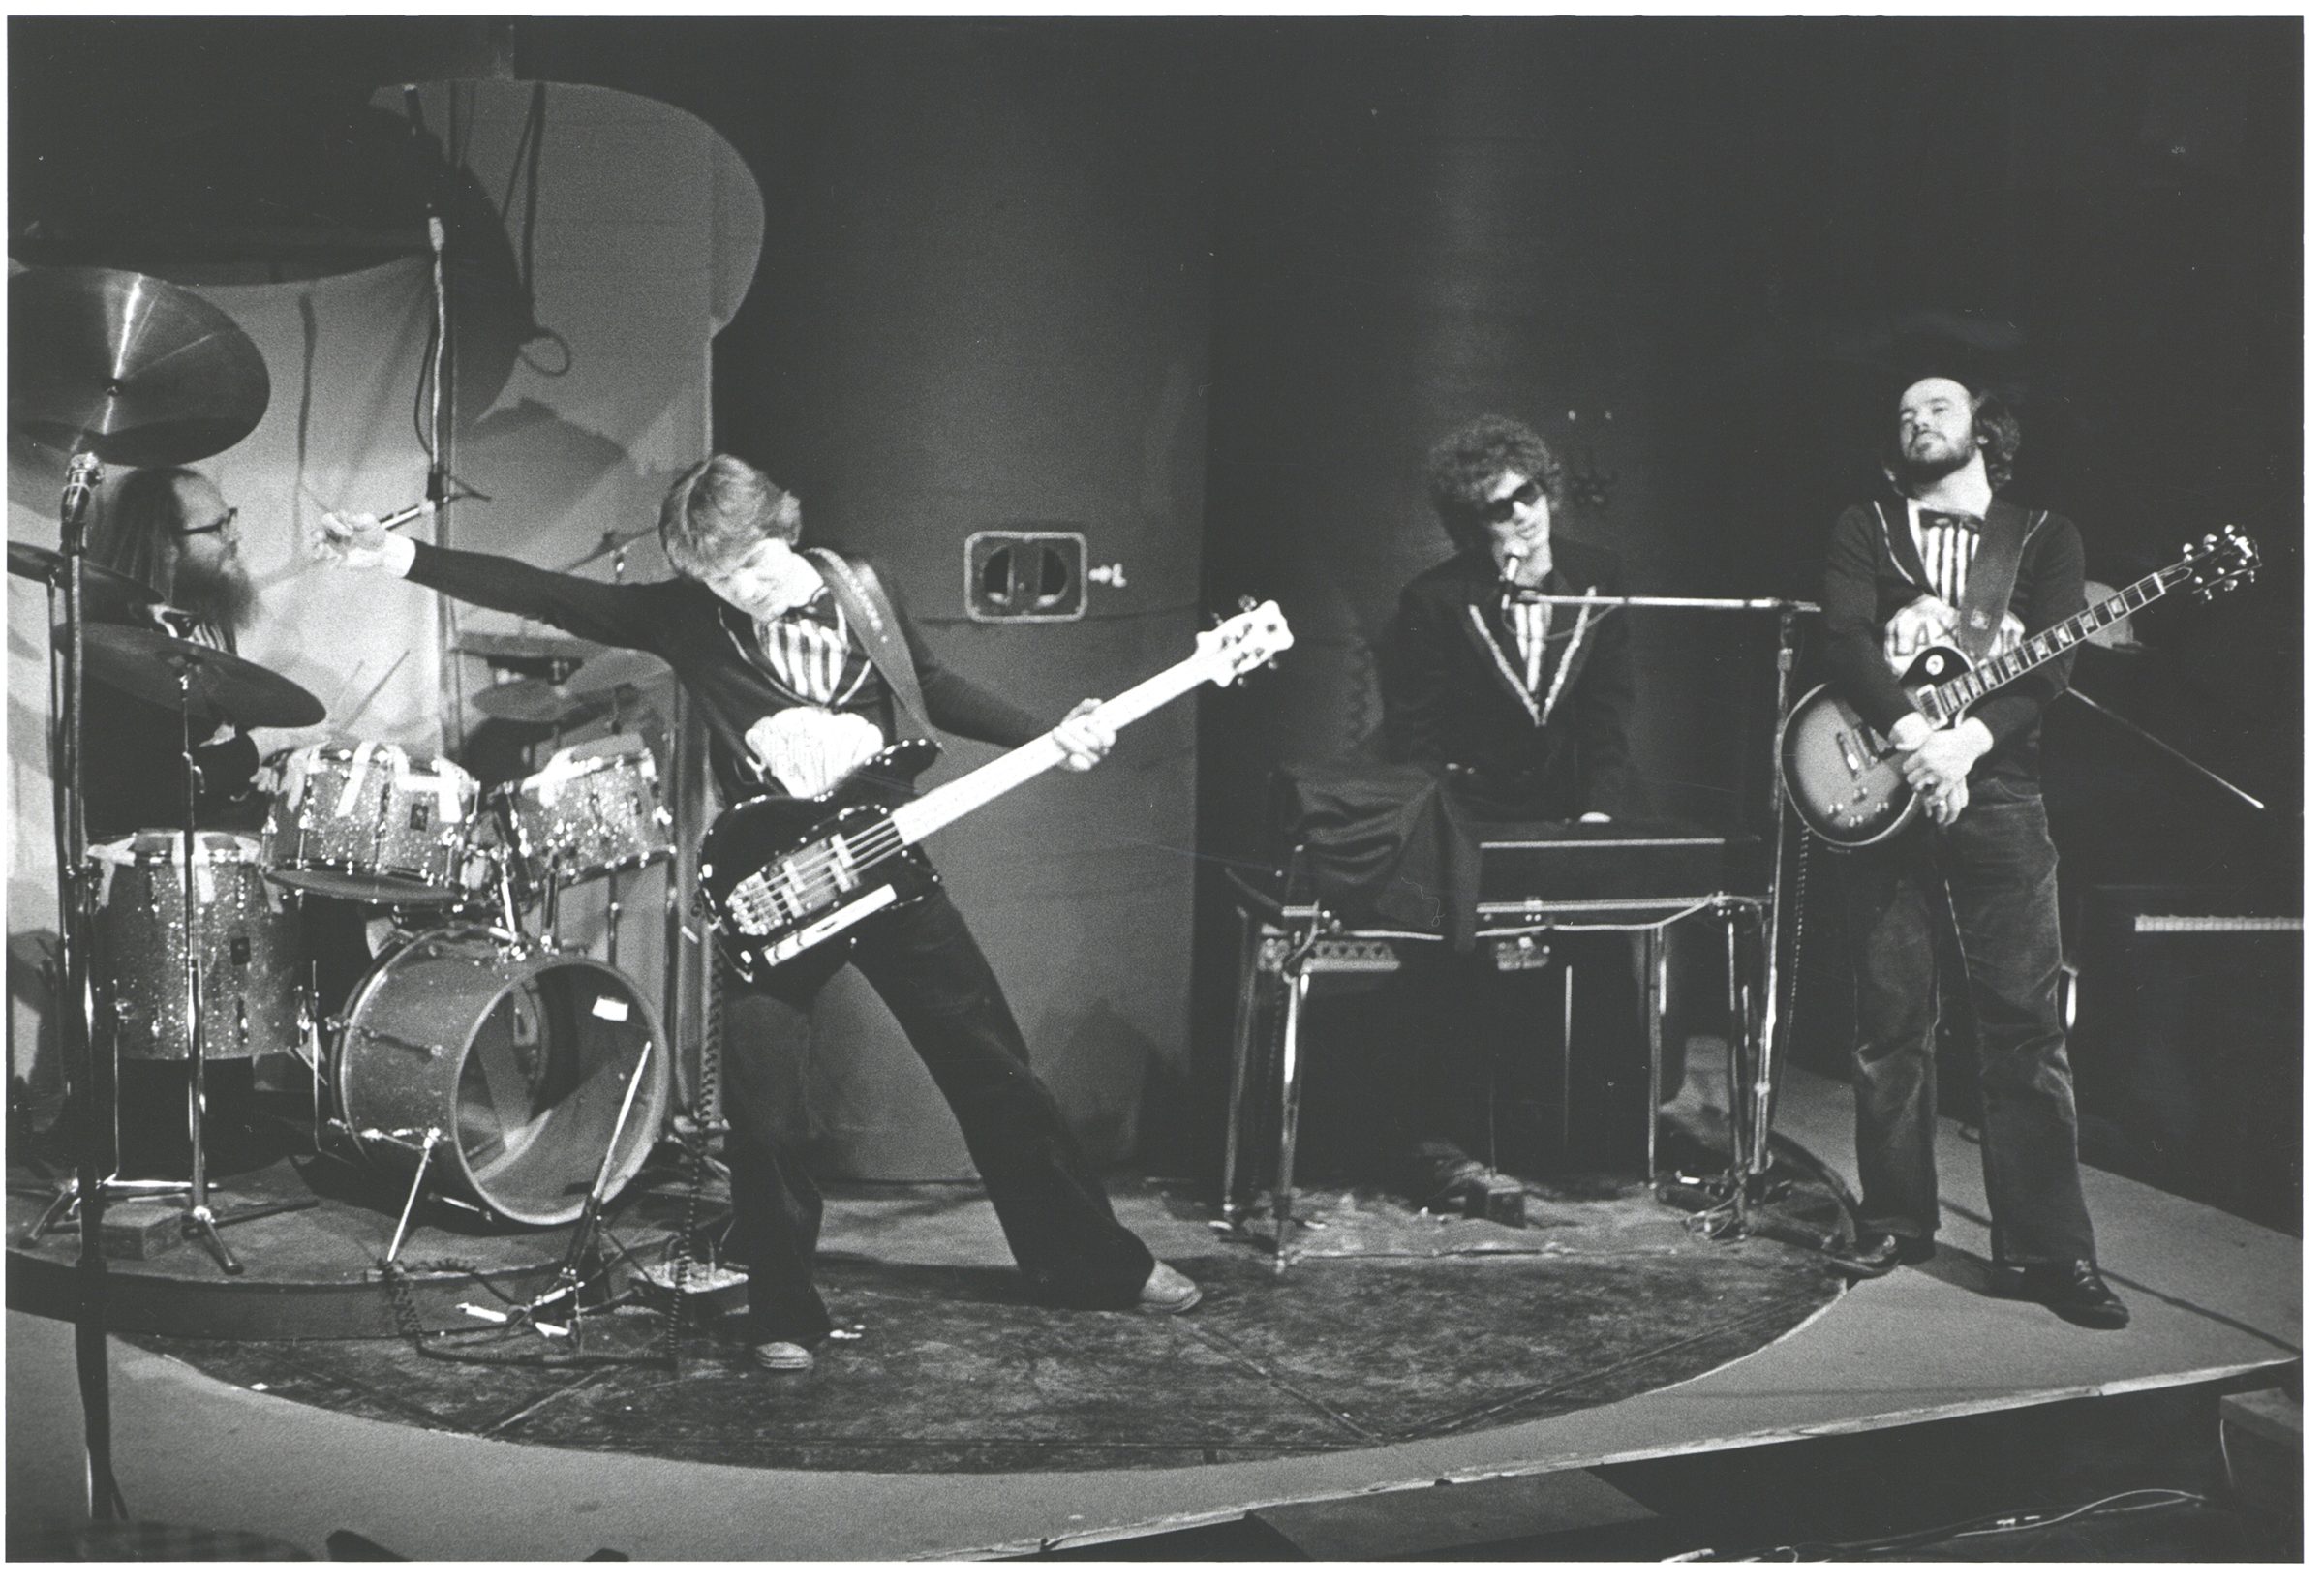 A black and white photo of a band playing music.